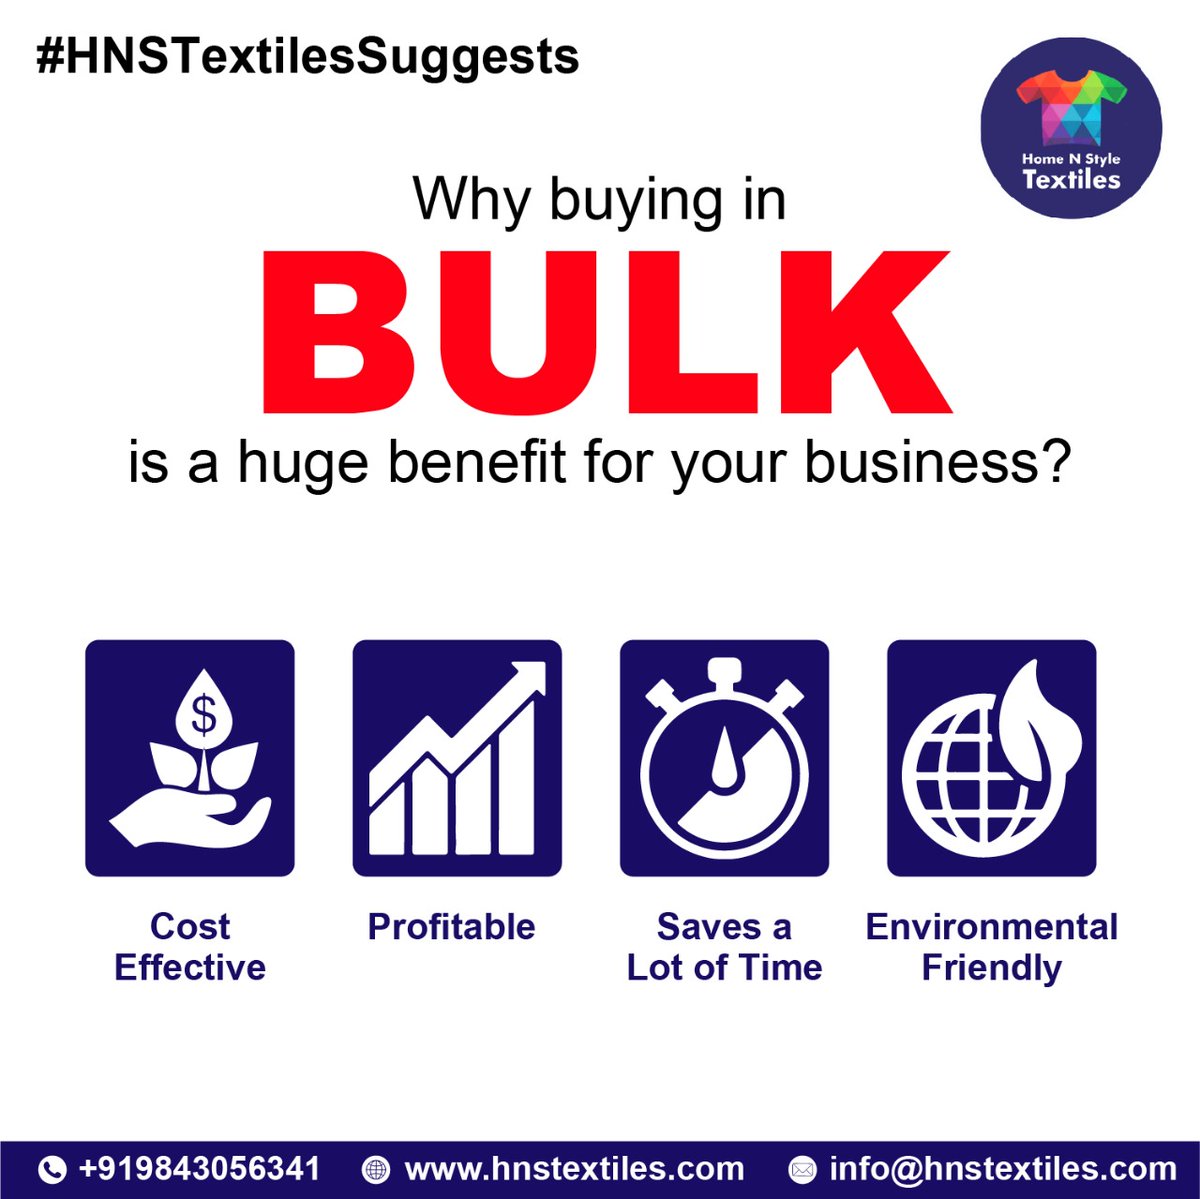 Buying products in bulk is far more reasonable than paying actual retail prices.  Your business will be successful if you buy in bulk.

#tshirtbrand #textilenews #textilesindia #apparelmanufacture #fashion #trends #lovefashion #India #happy #startyourbusiness #sales #money